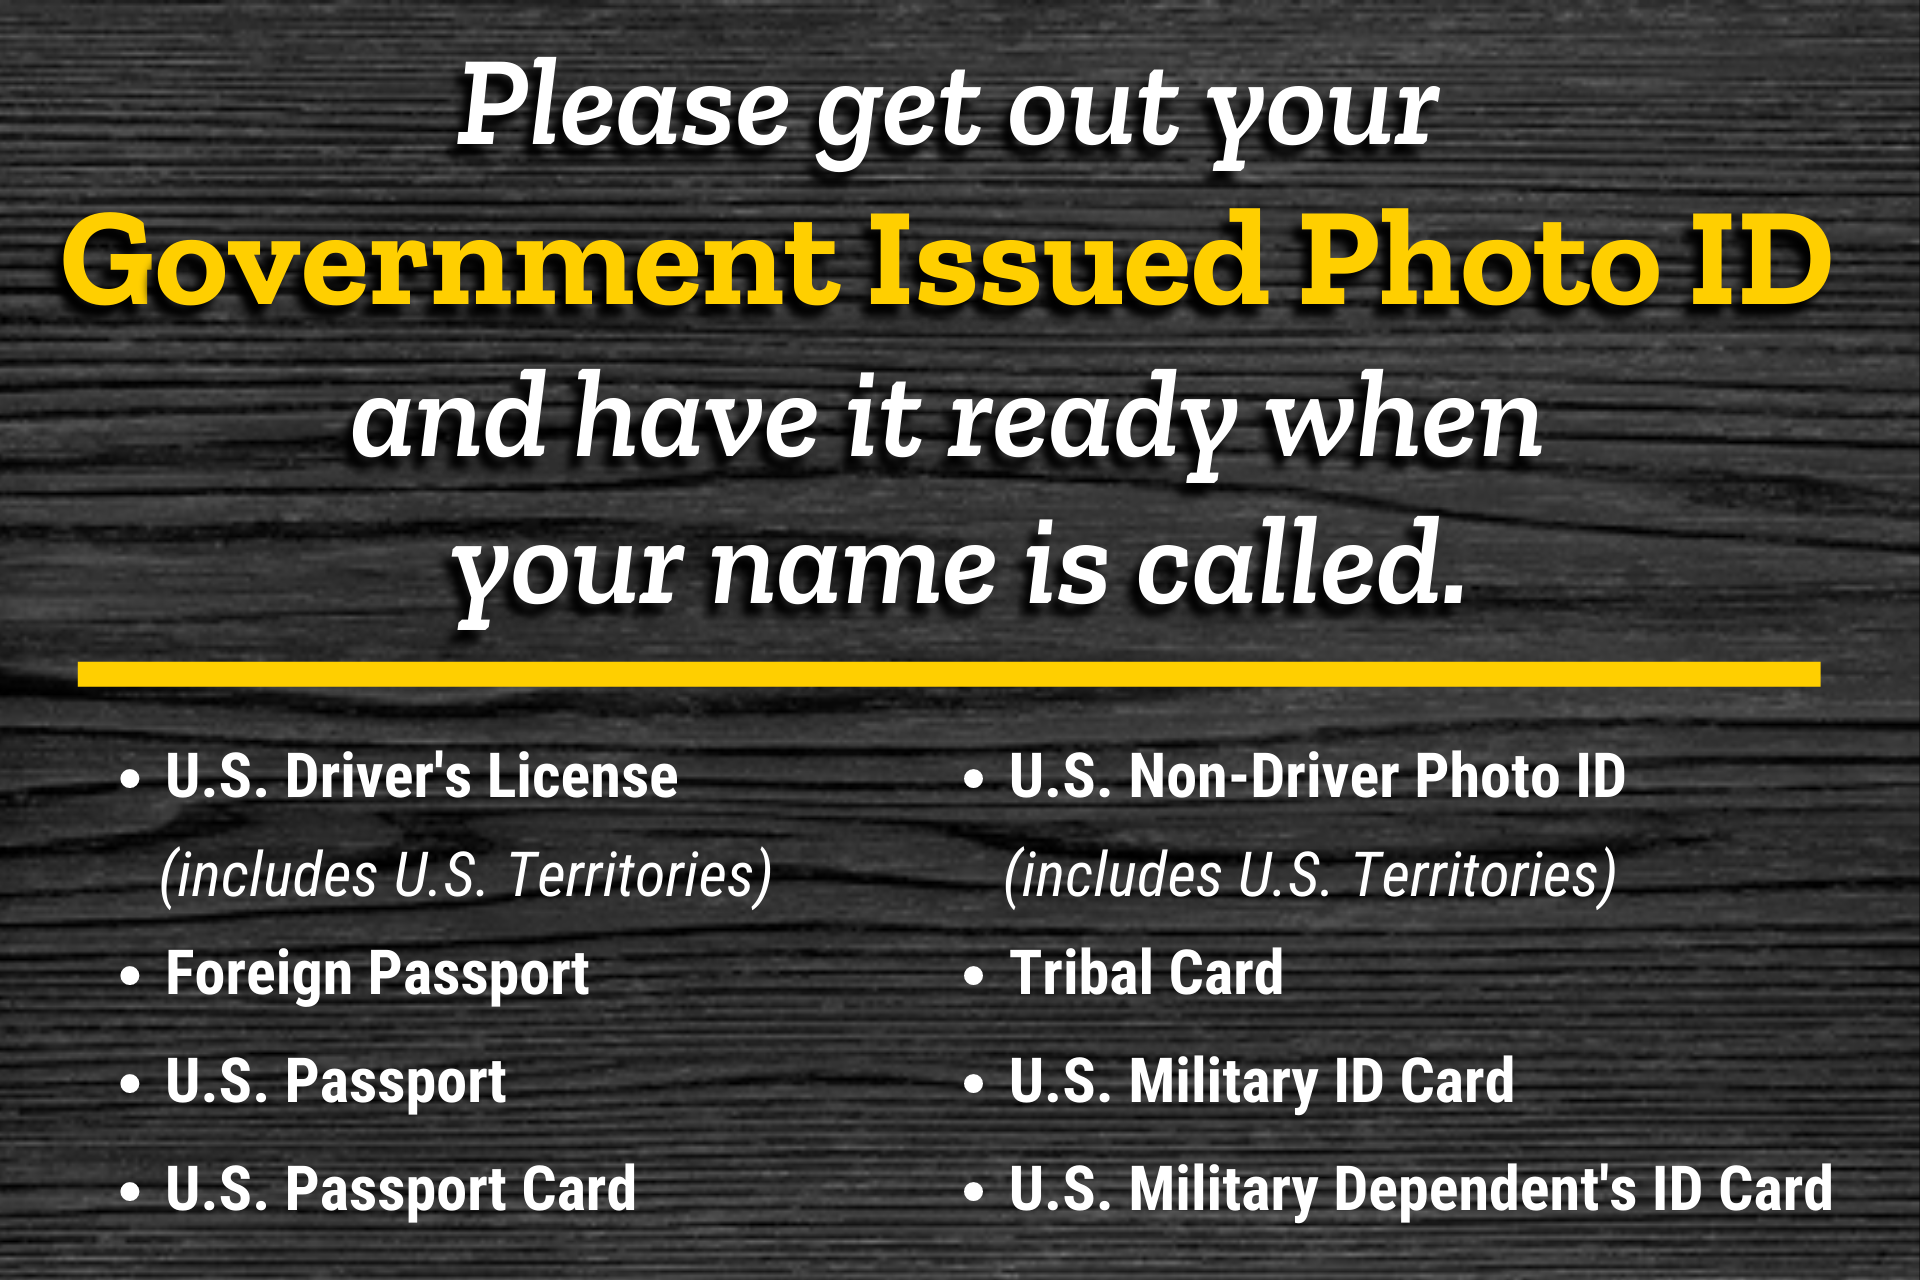 Have your government issued ID ready